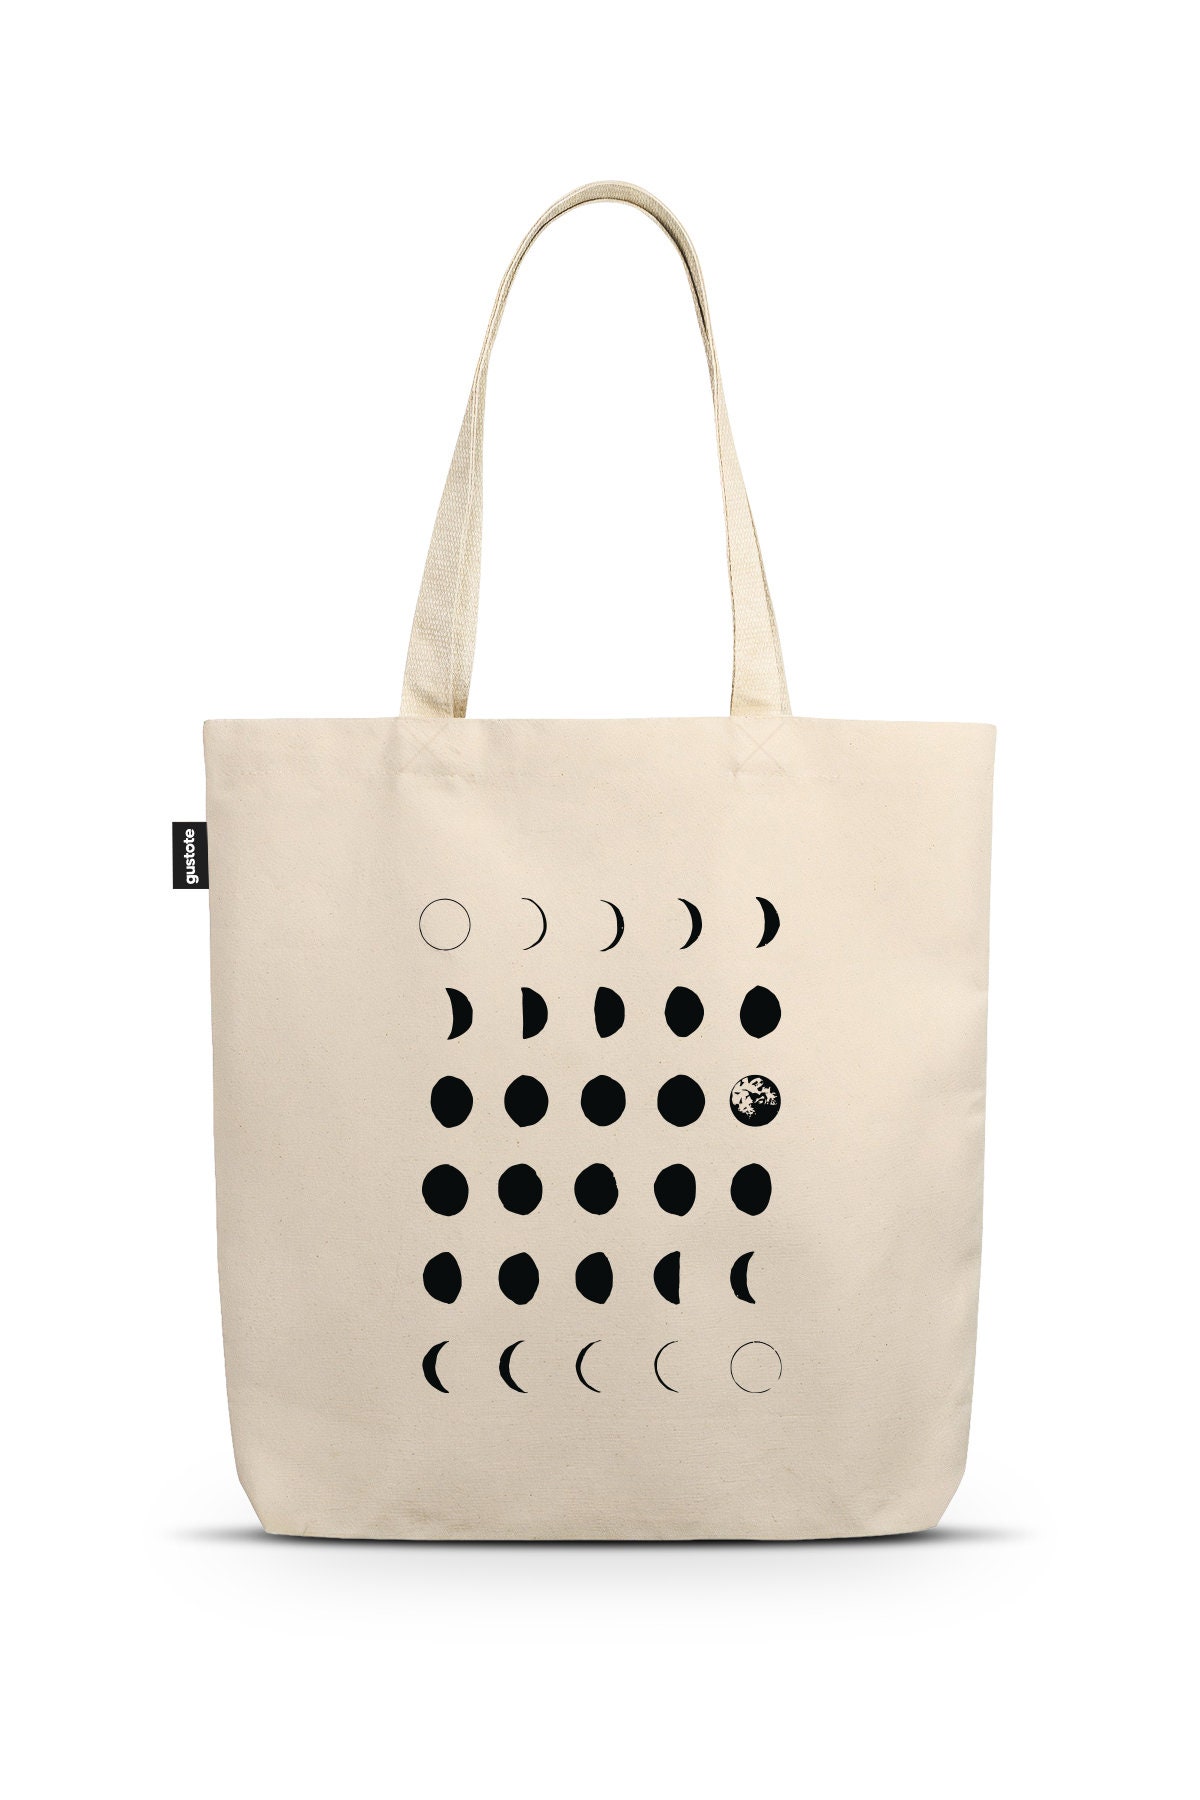 Moon Phases Canvas Tote Bag With Images of All Lunar Cycles - Etsy